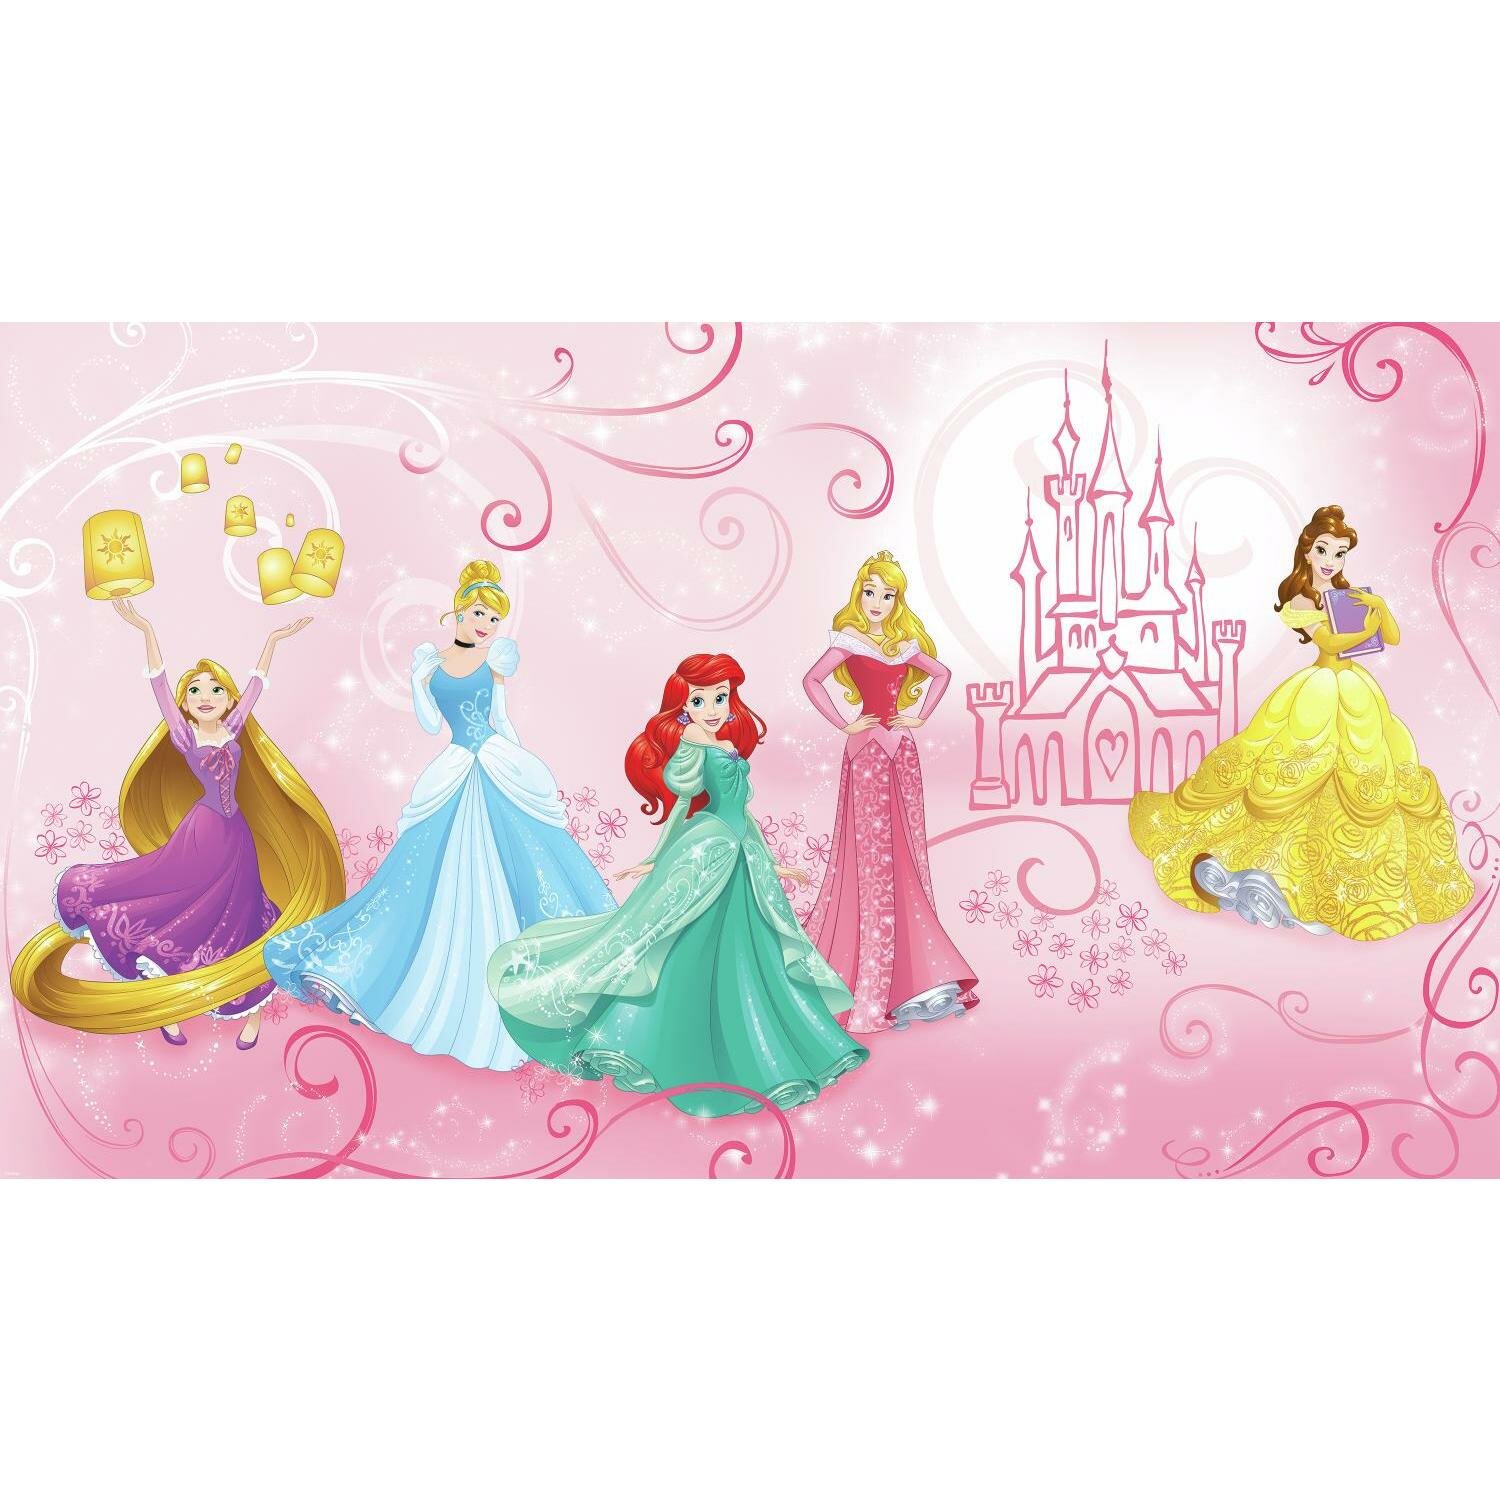 x 6 ft. 10.5 ft RoomMates JL1388M Disney Princess Enchanted Spray and Stick Removable Wall Mural 